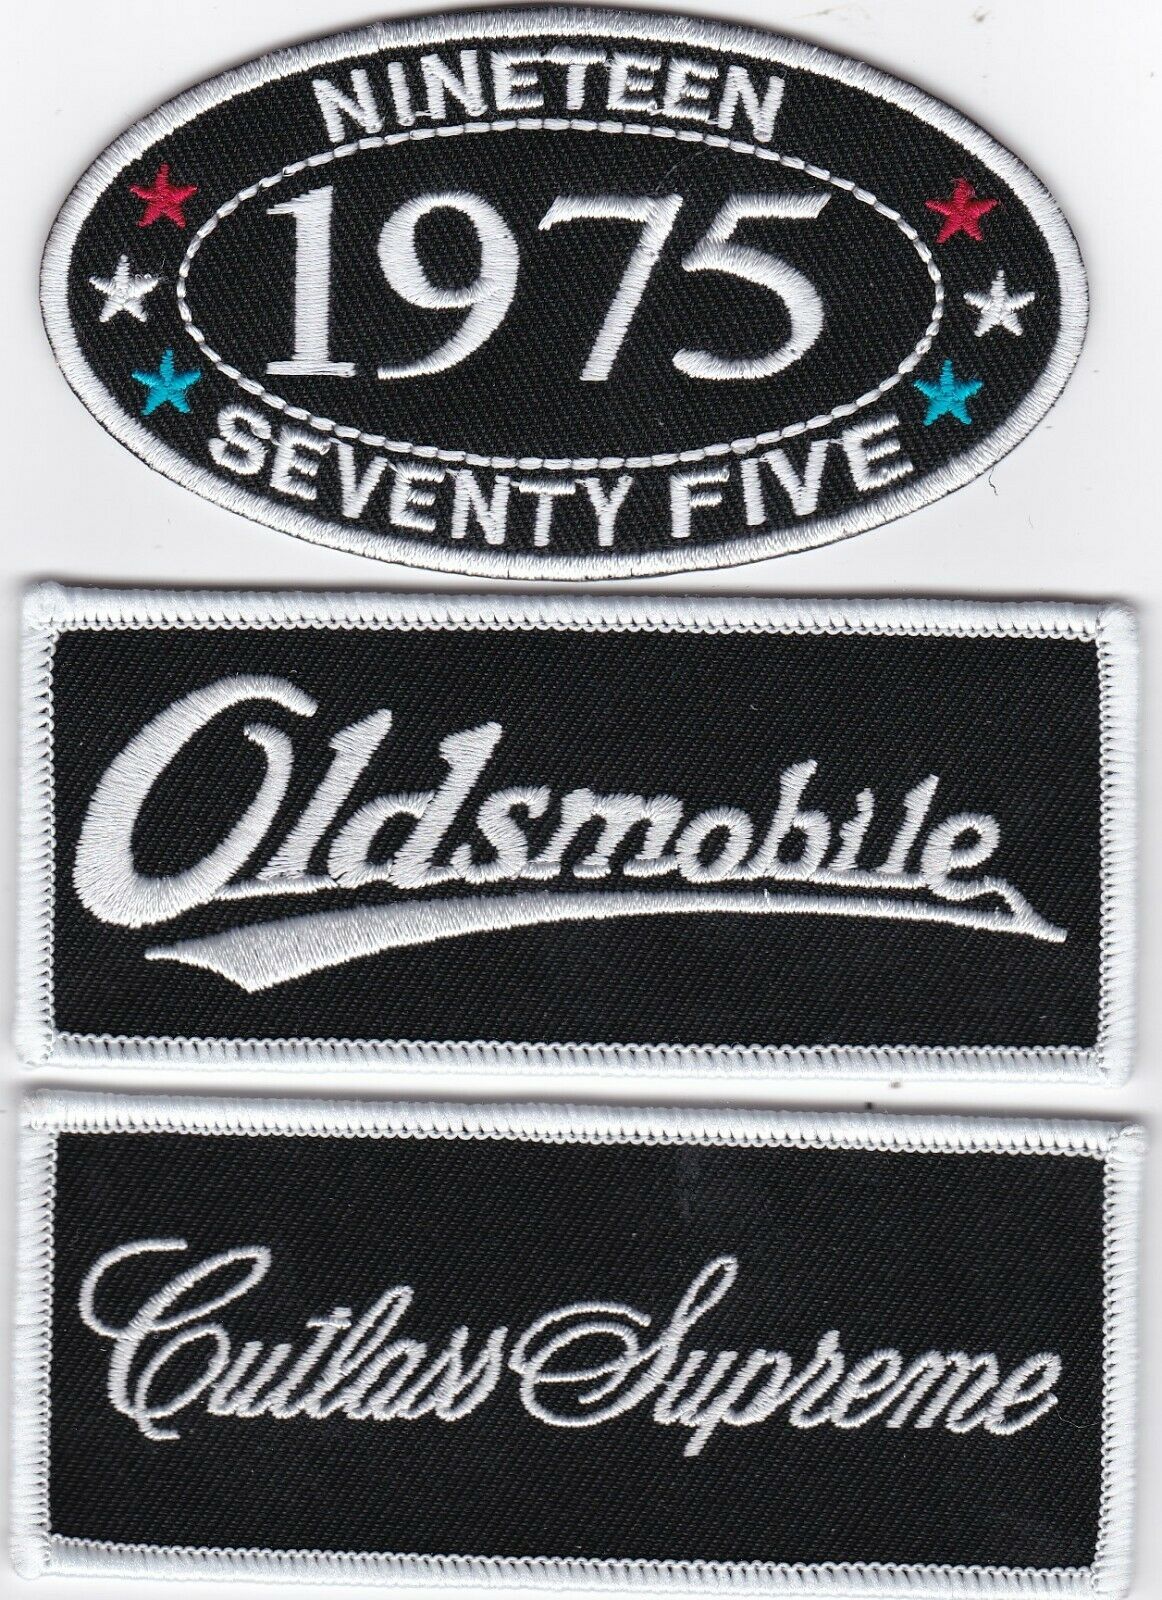 1975 OLDSMOBILE CUTLASS SUPREME SEW/IRON PATCH EMBLEM BADGE EMBROIDERED  - $16.99